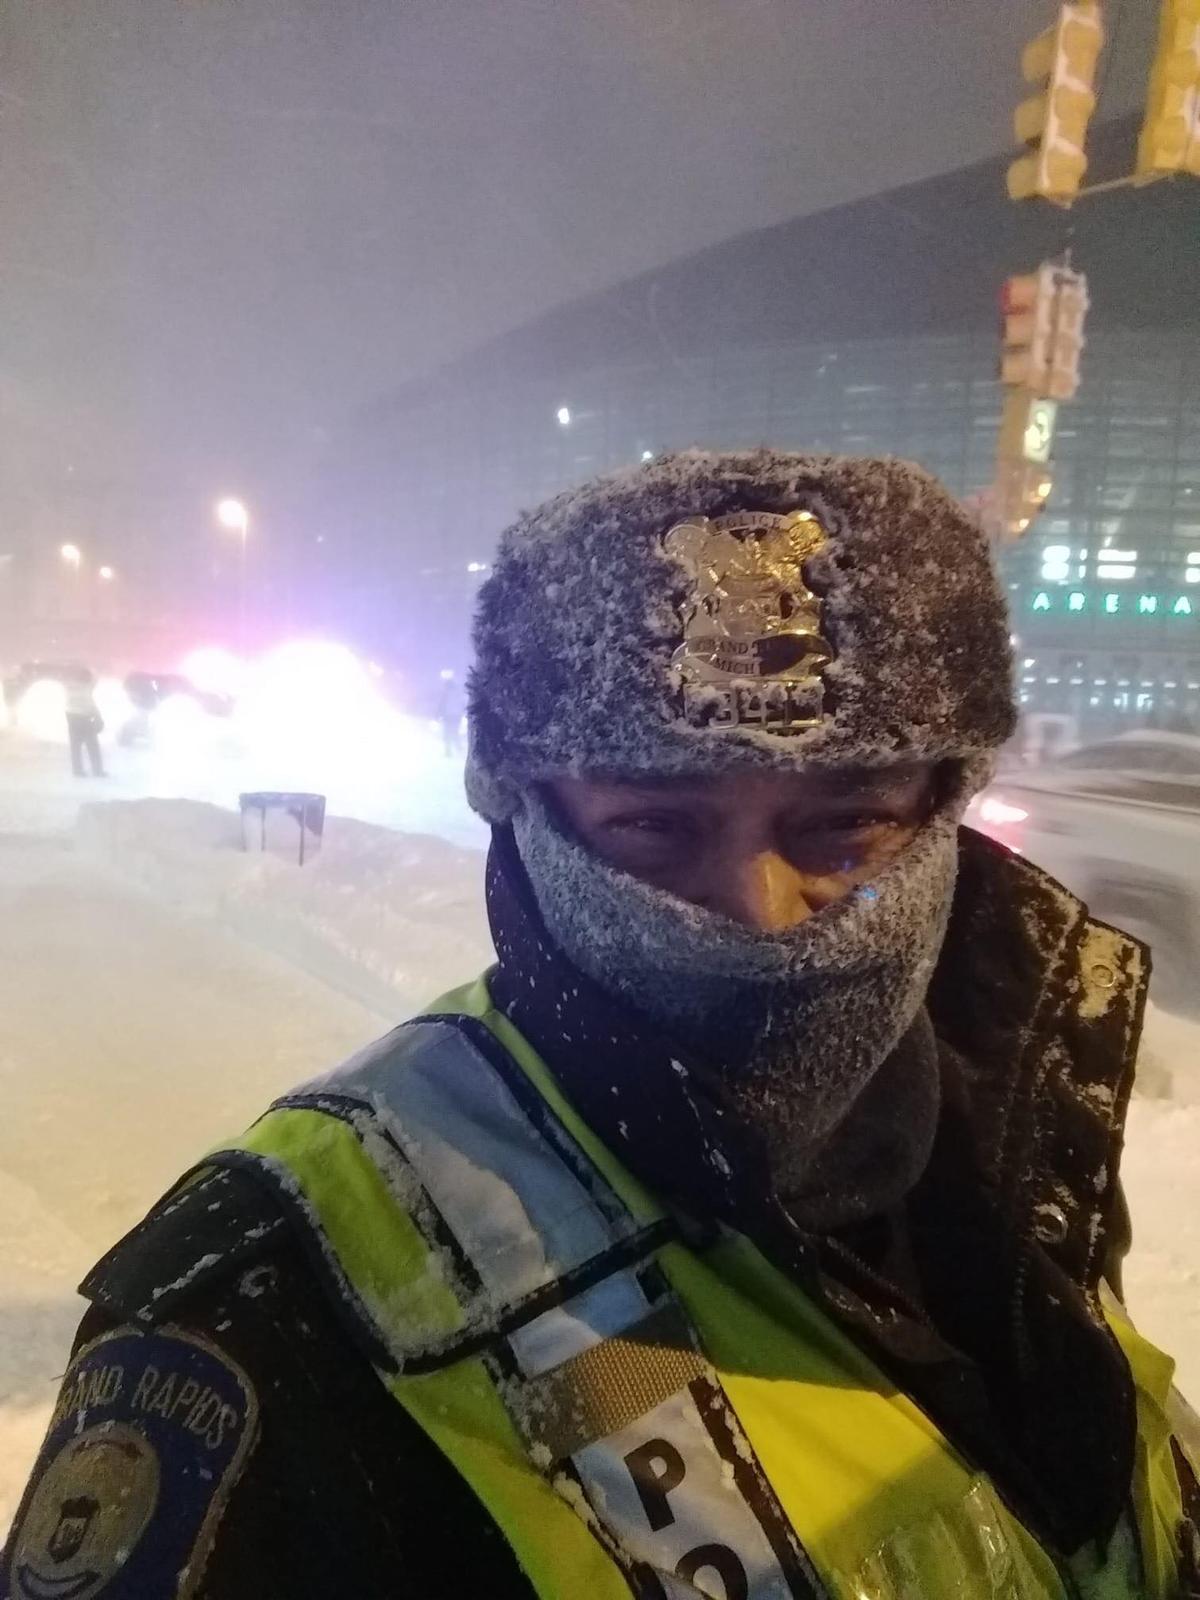 President Newton of the Fraternal Order of Police working overnight at the Van Andel Arena on Jan. 29. (Fraternal Order of Police/Facebook)